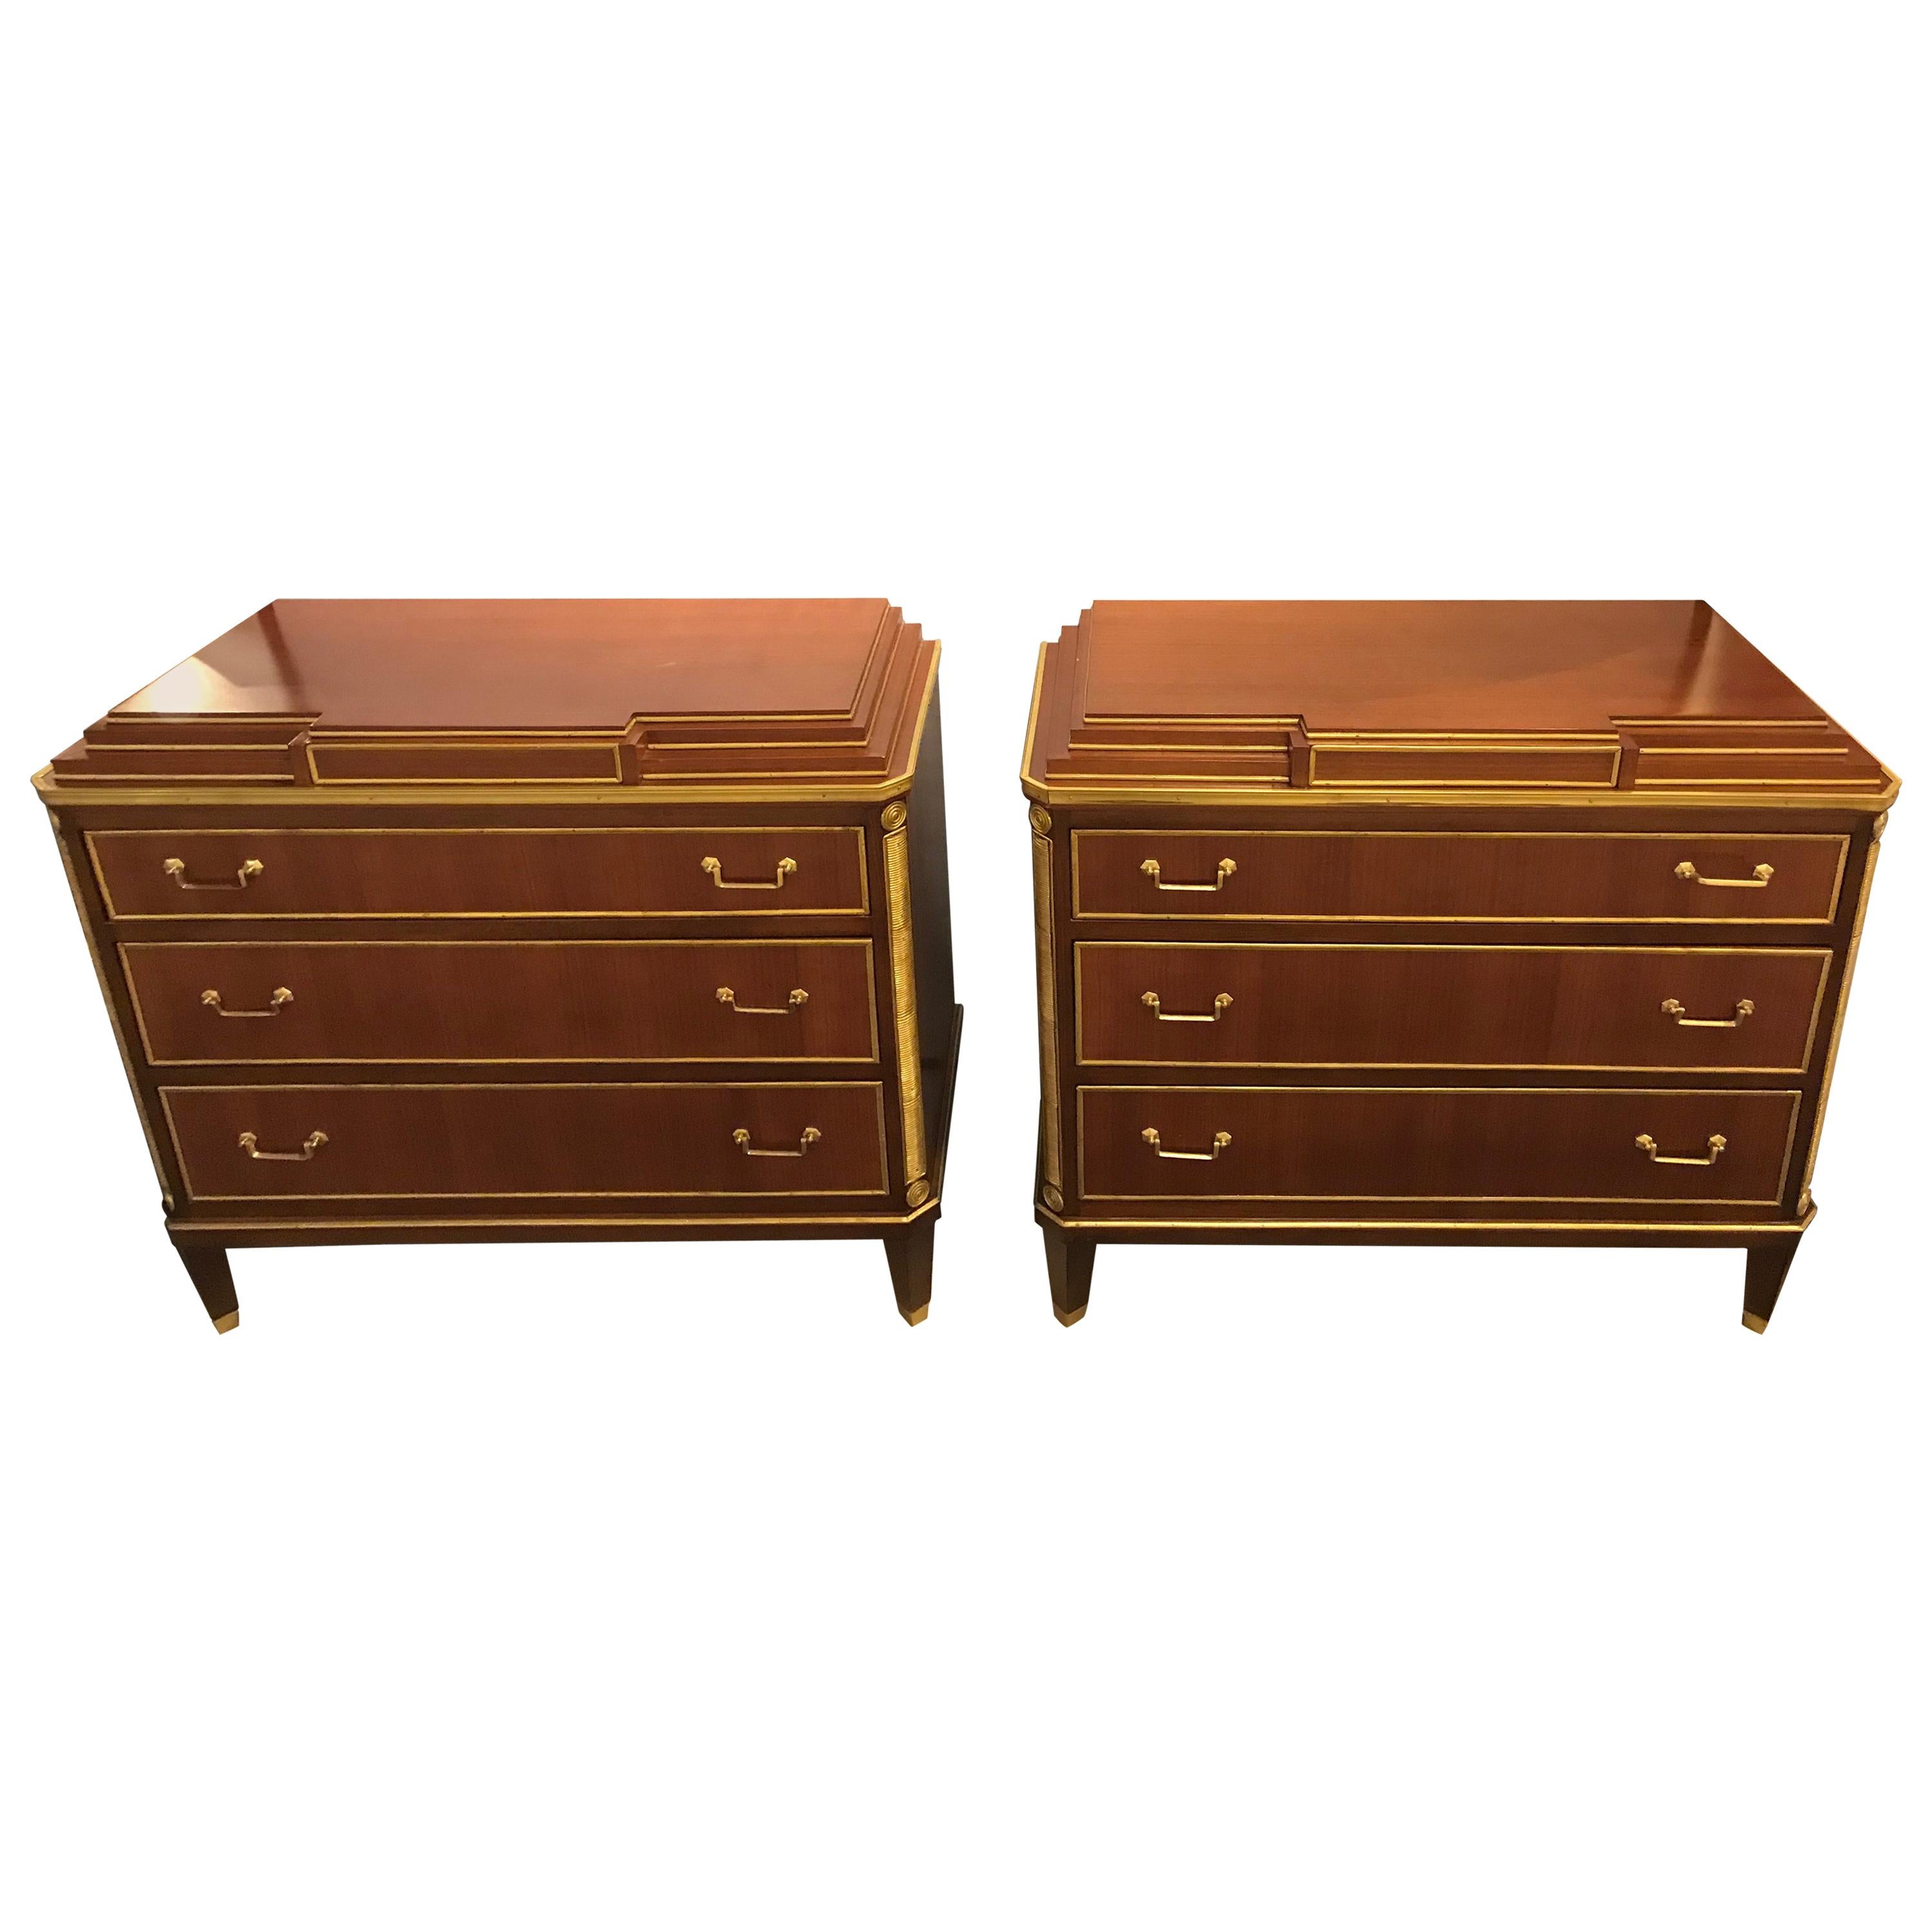 Mahogany Double Step Up Russian Neoclassical Style Commodes / Night Stands, Pair